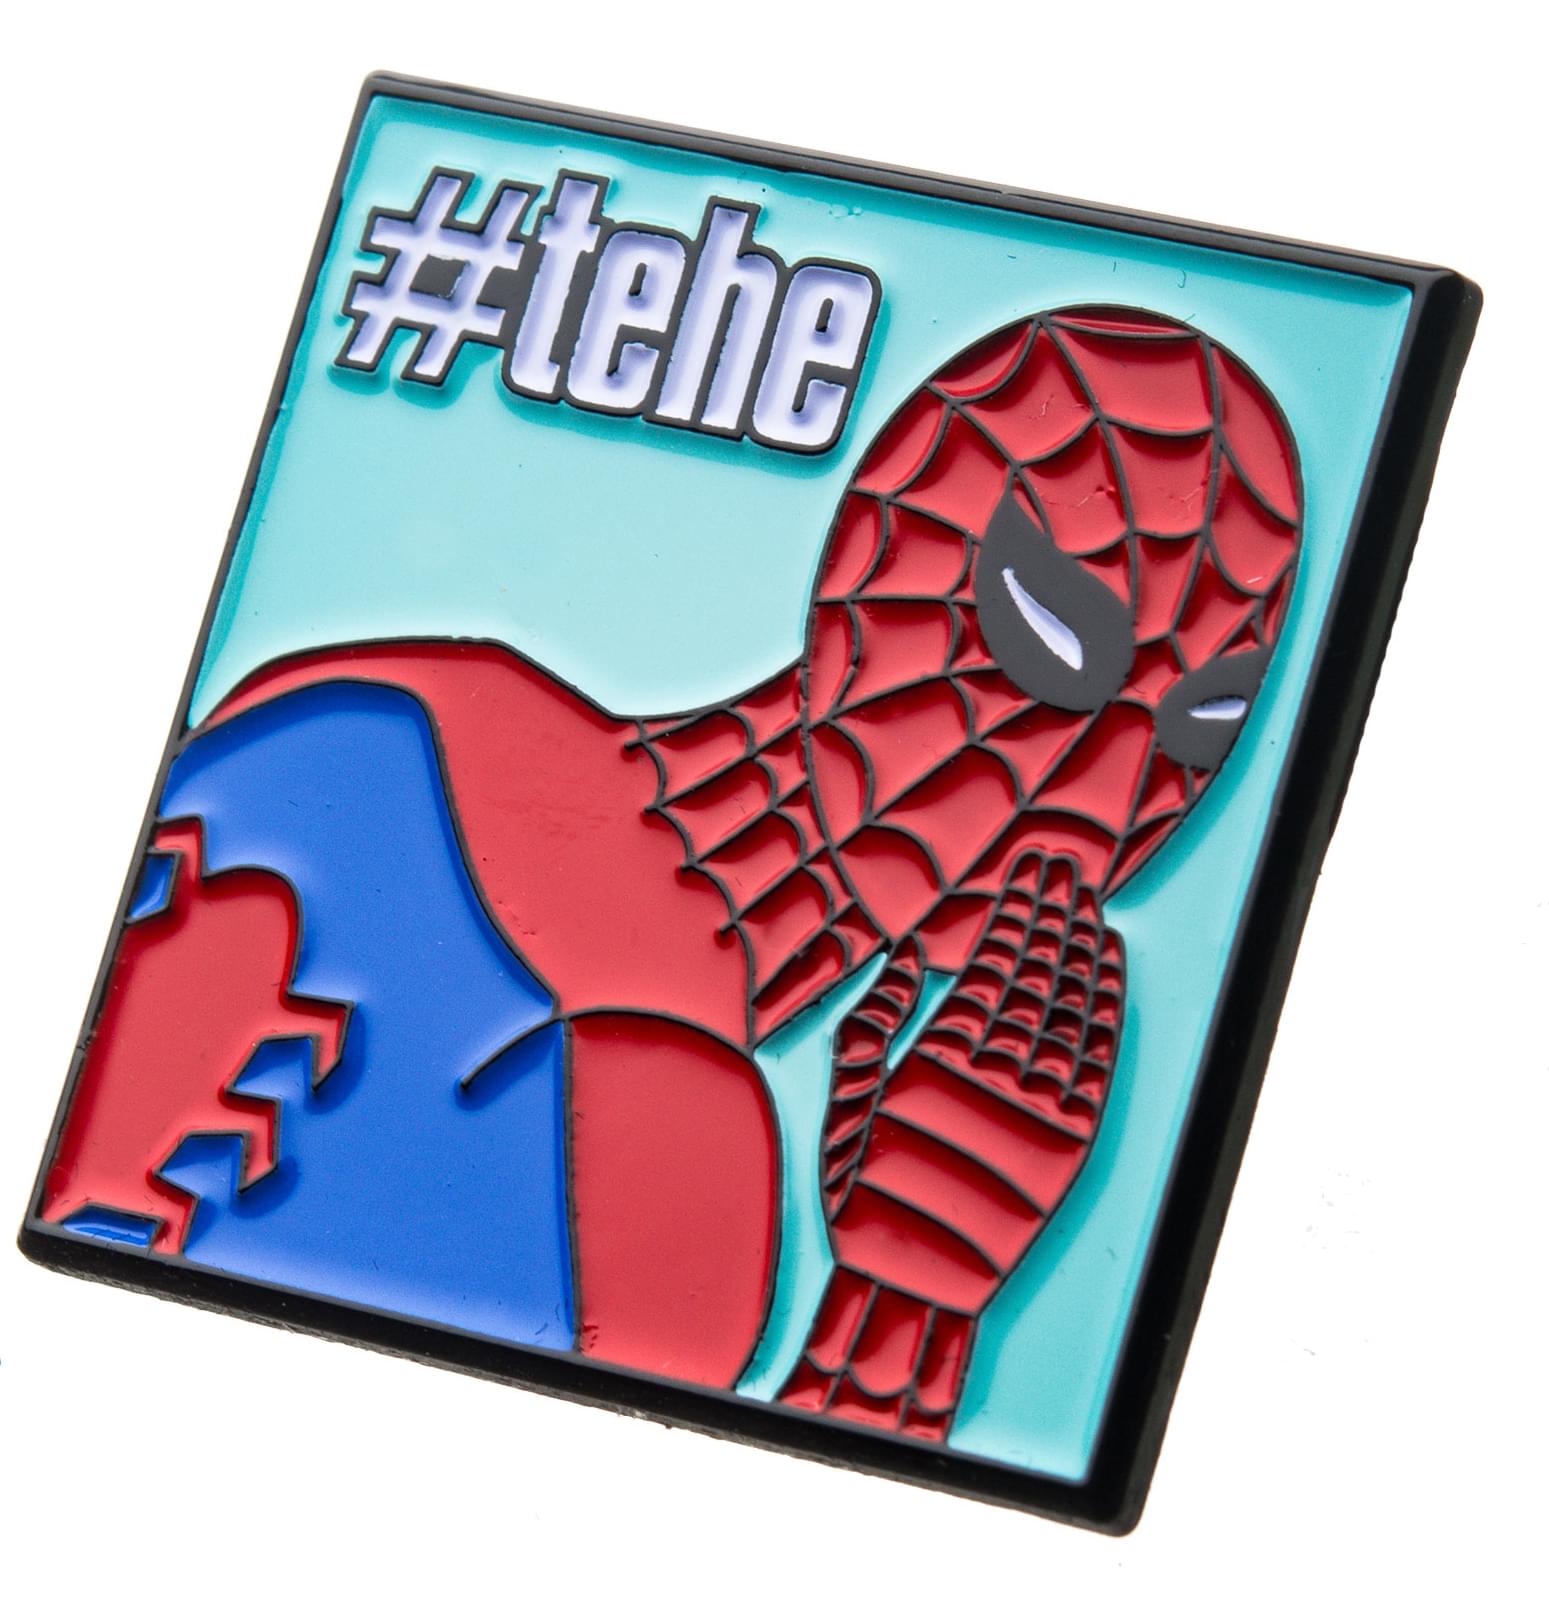 Marvel Spider-Man 60s Show #Tehe Enamel Collector Pin